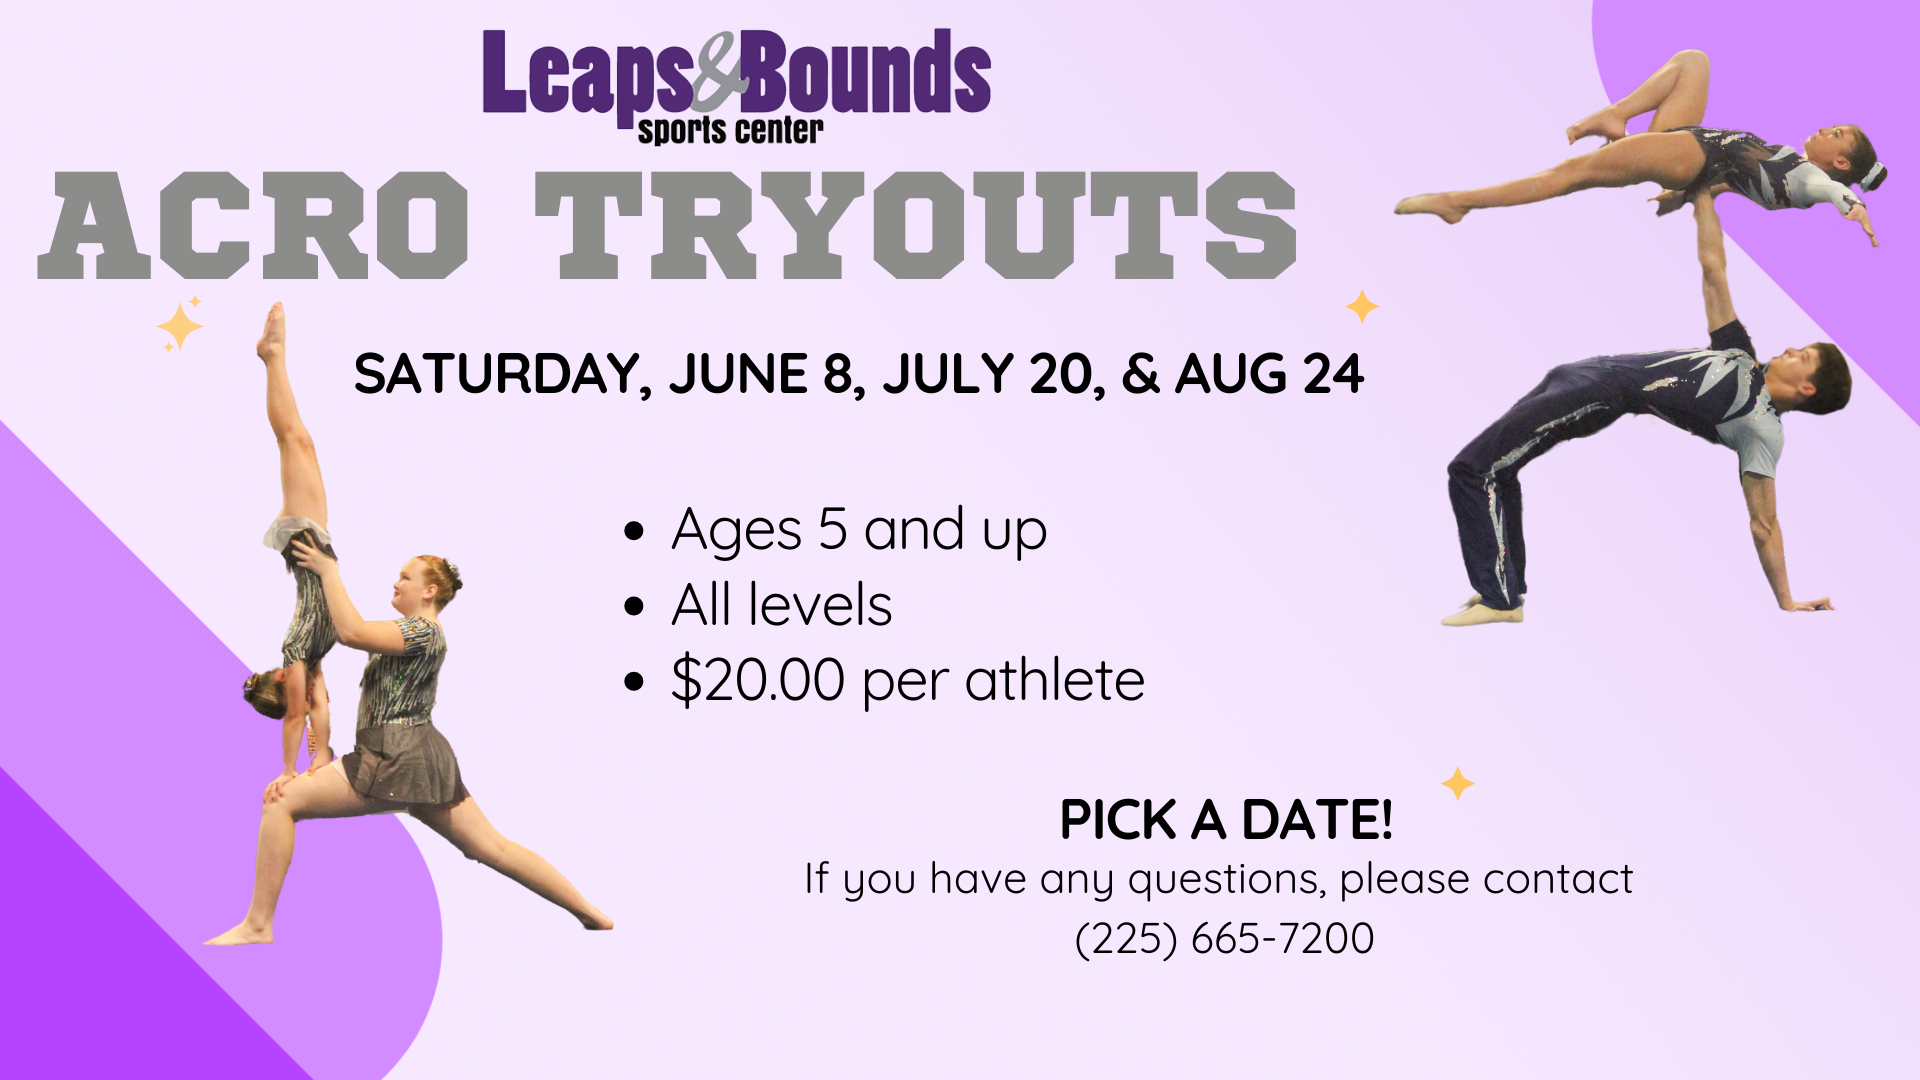 Flyer for Leaps & Bounds Sports Center Acro Tryouts. Text reads: "ACRO TRYOUTS - Saturday, June 8, July 20, & Aug 24 - Ages 5 and up - All levels - $20.00 per athlete. Pick a date! Contact (225) 665-7200 with questions. Check out our Gymnastics Classes Denham